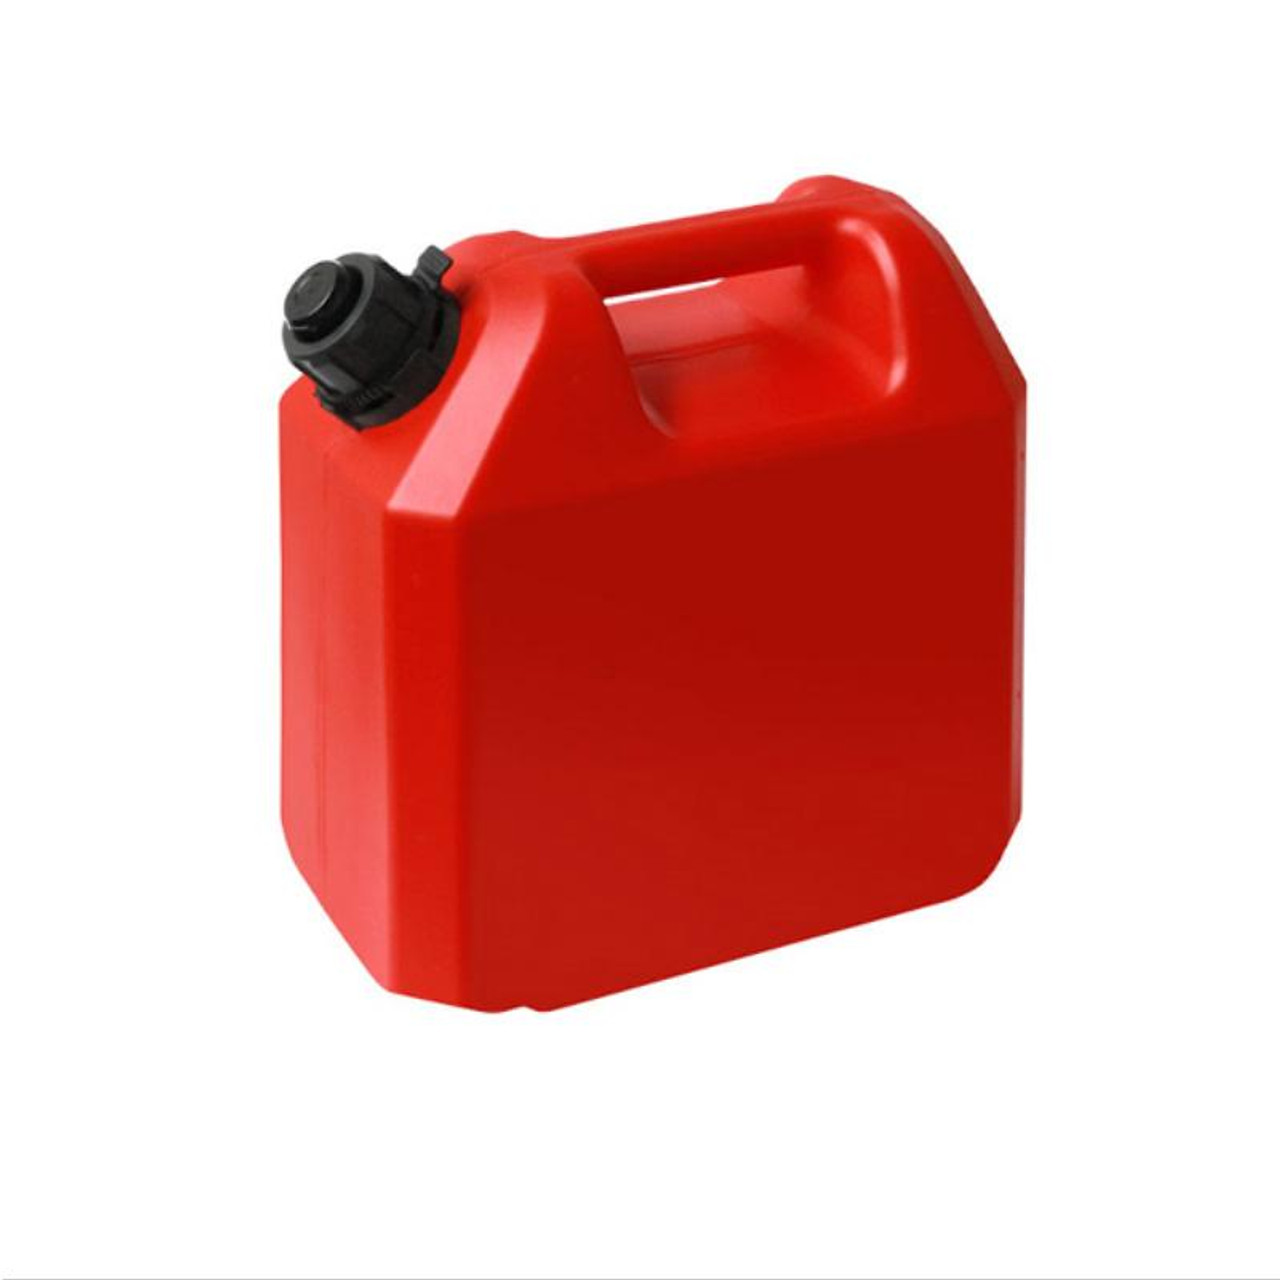 https://cdn11.bigcommerce.com/s-ydm181c/images/stencil/1280x1280/products/19107/36642/cansb-fuel-jerry-can-polyethylene-hd-374007-3740-6343_std__05865.1615118131.jpg?c=2